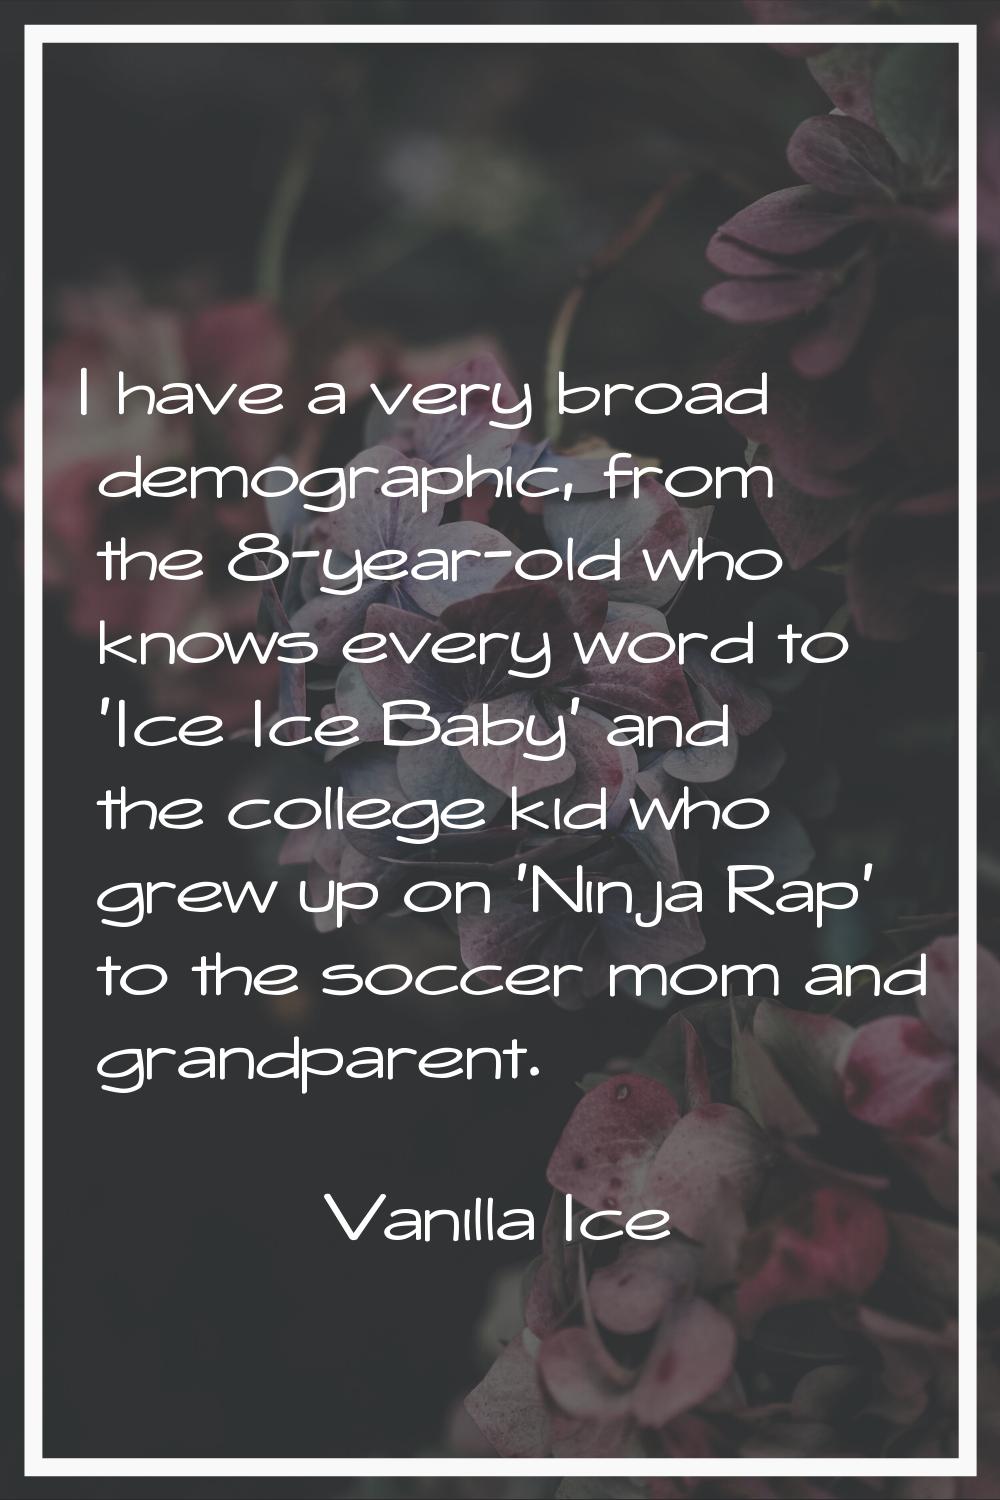 I have a very broad demographic, from the 8-year-old who knows every word to 'Ice Ice Baby' and the